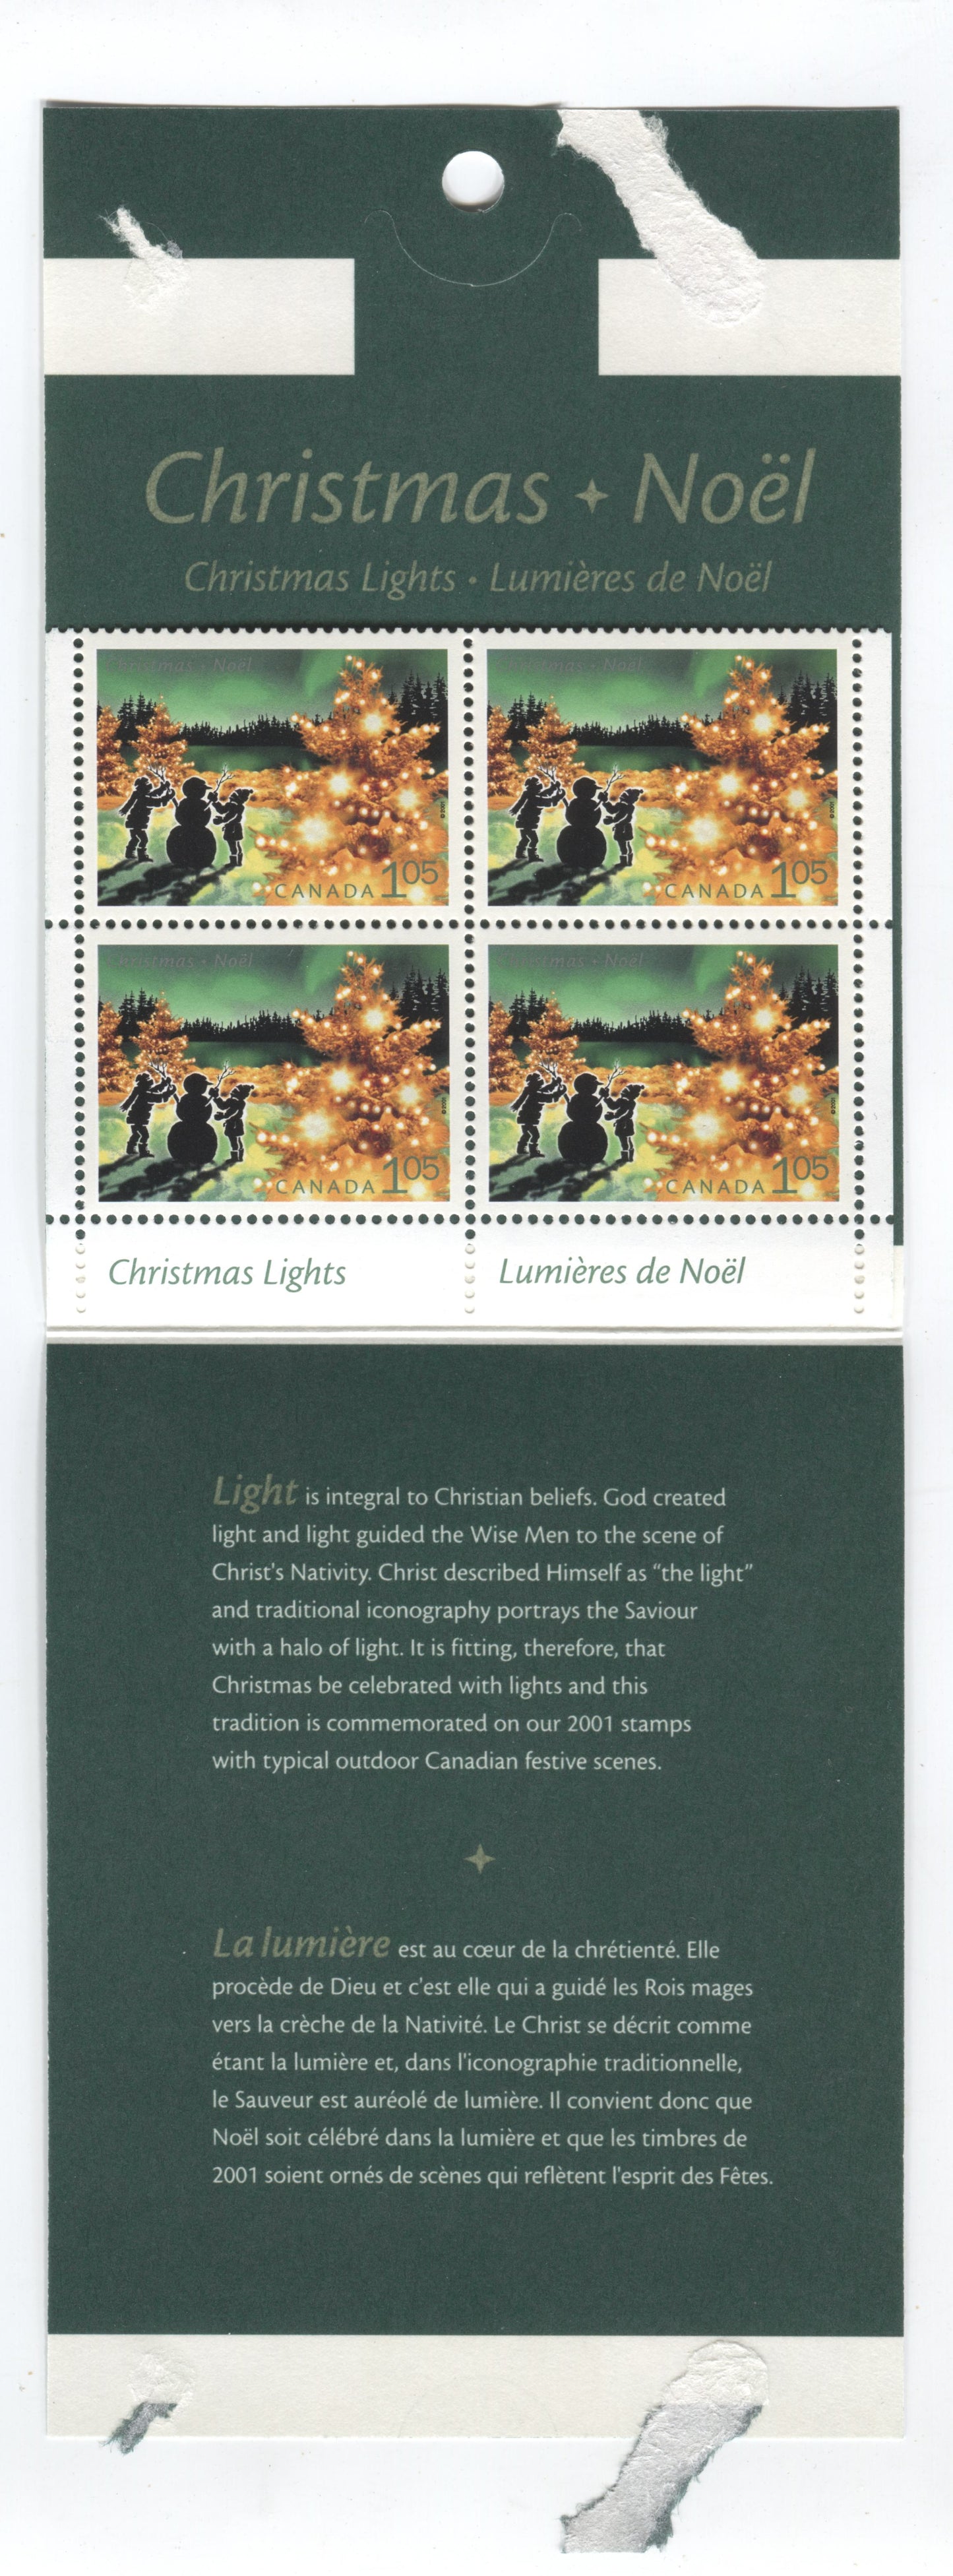 Canada #BK250a-b 2001 Christmas Issue, Complete $6.30 Booklet, Tullis Russell Coatings Paper, Dead Paper, 4 mm GT-4 Tagging